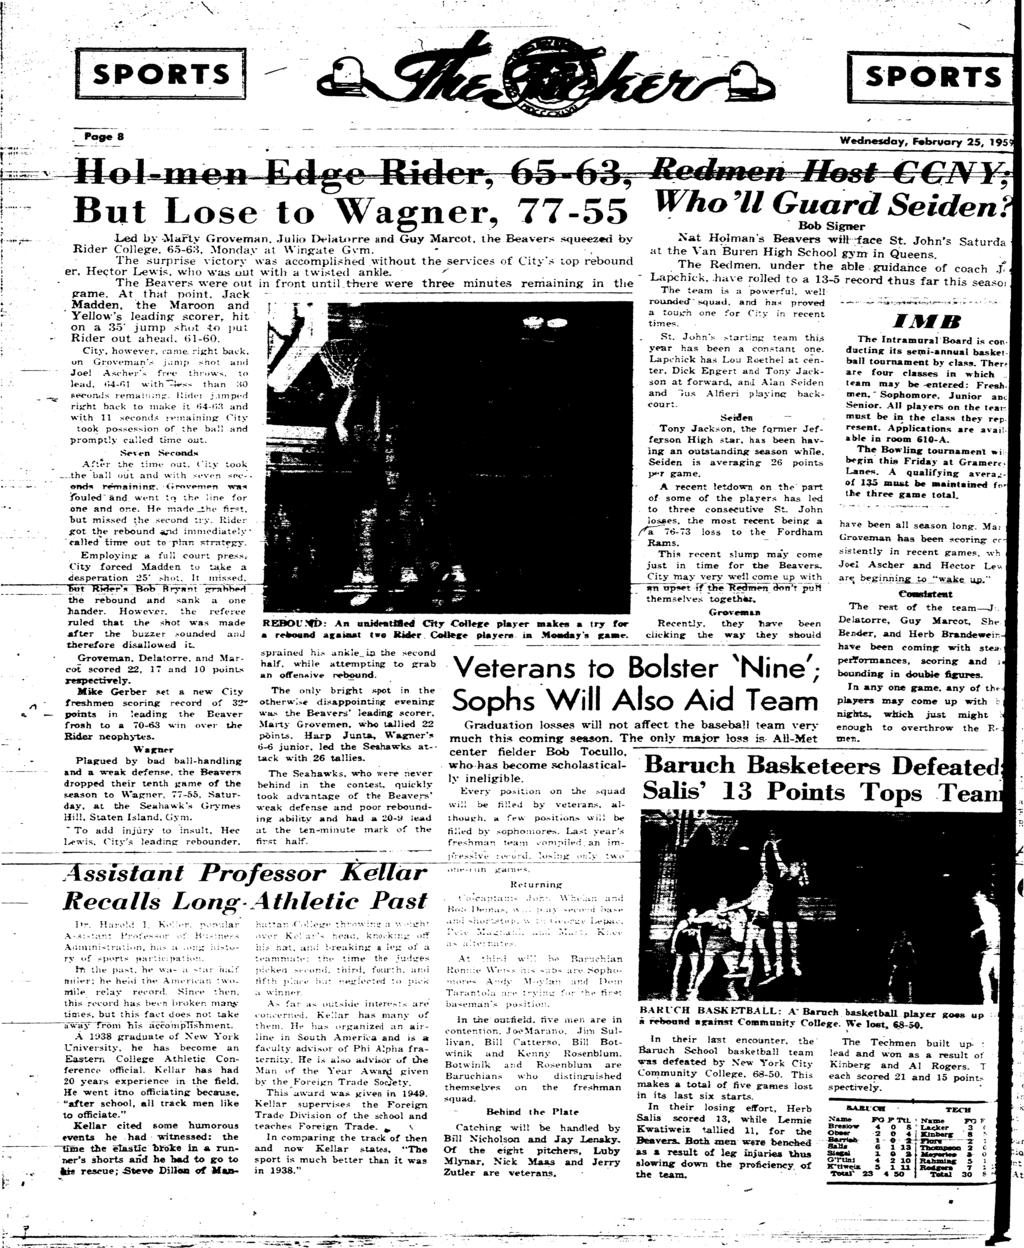 V, SPORTS SPORTS Page 8 Wednesday, February 25, 95< Bu Lose o Wagner, 77-55 Wha ' U G d Seden': -~? -Led by -Mary Groveman. Julo D^laorre and Guy Marco, he Beavers squeezed by Rder CoJlegre.